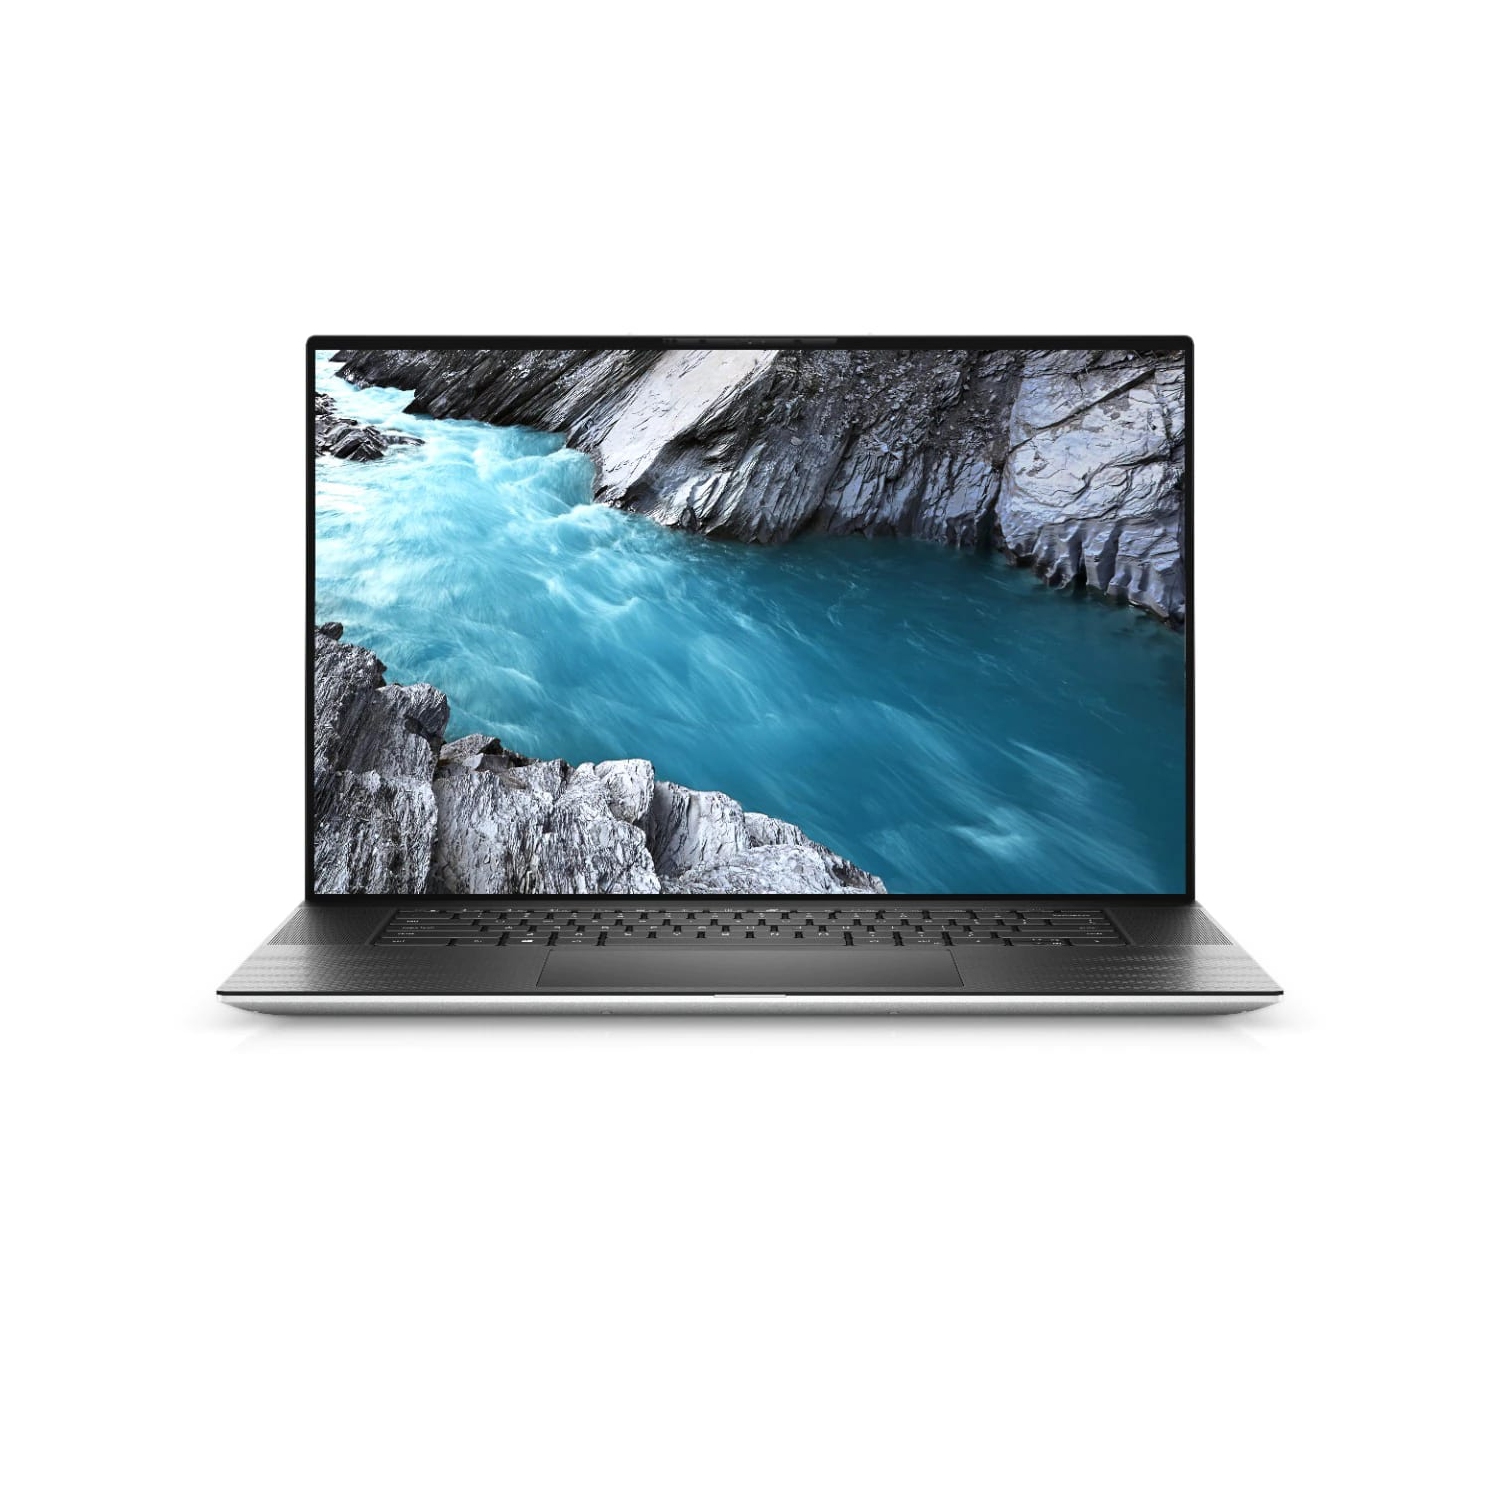 Refurbished (Excellent) - Dell XPS 17 9700 Laptop (2020) | 17" 4K Touch | Core i7 - 2TB SSD - 64GB RAM - RTX 2060 | 8 Cores @ 5.1 GHz - 10th Gen CPU Certified Refurbished